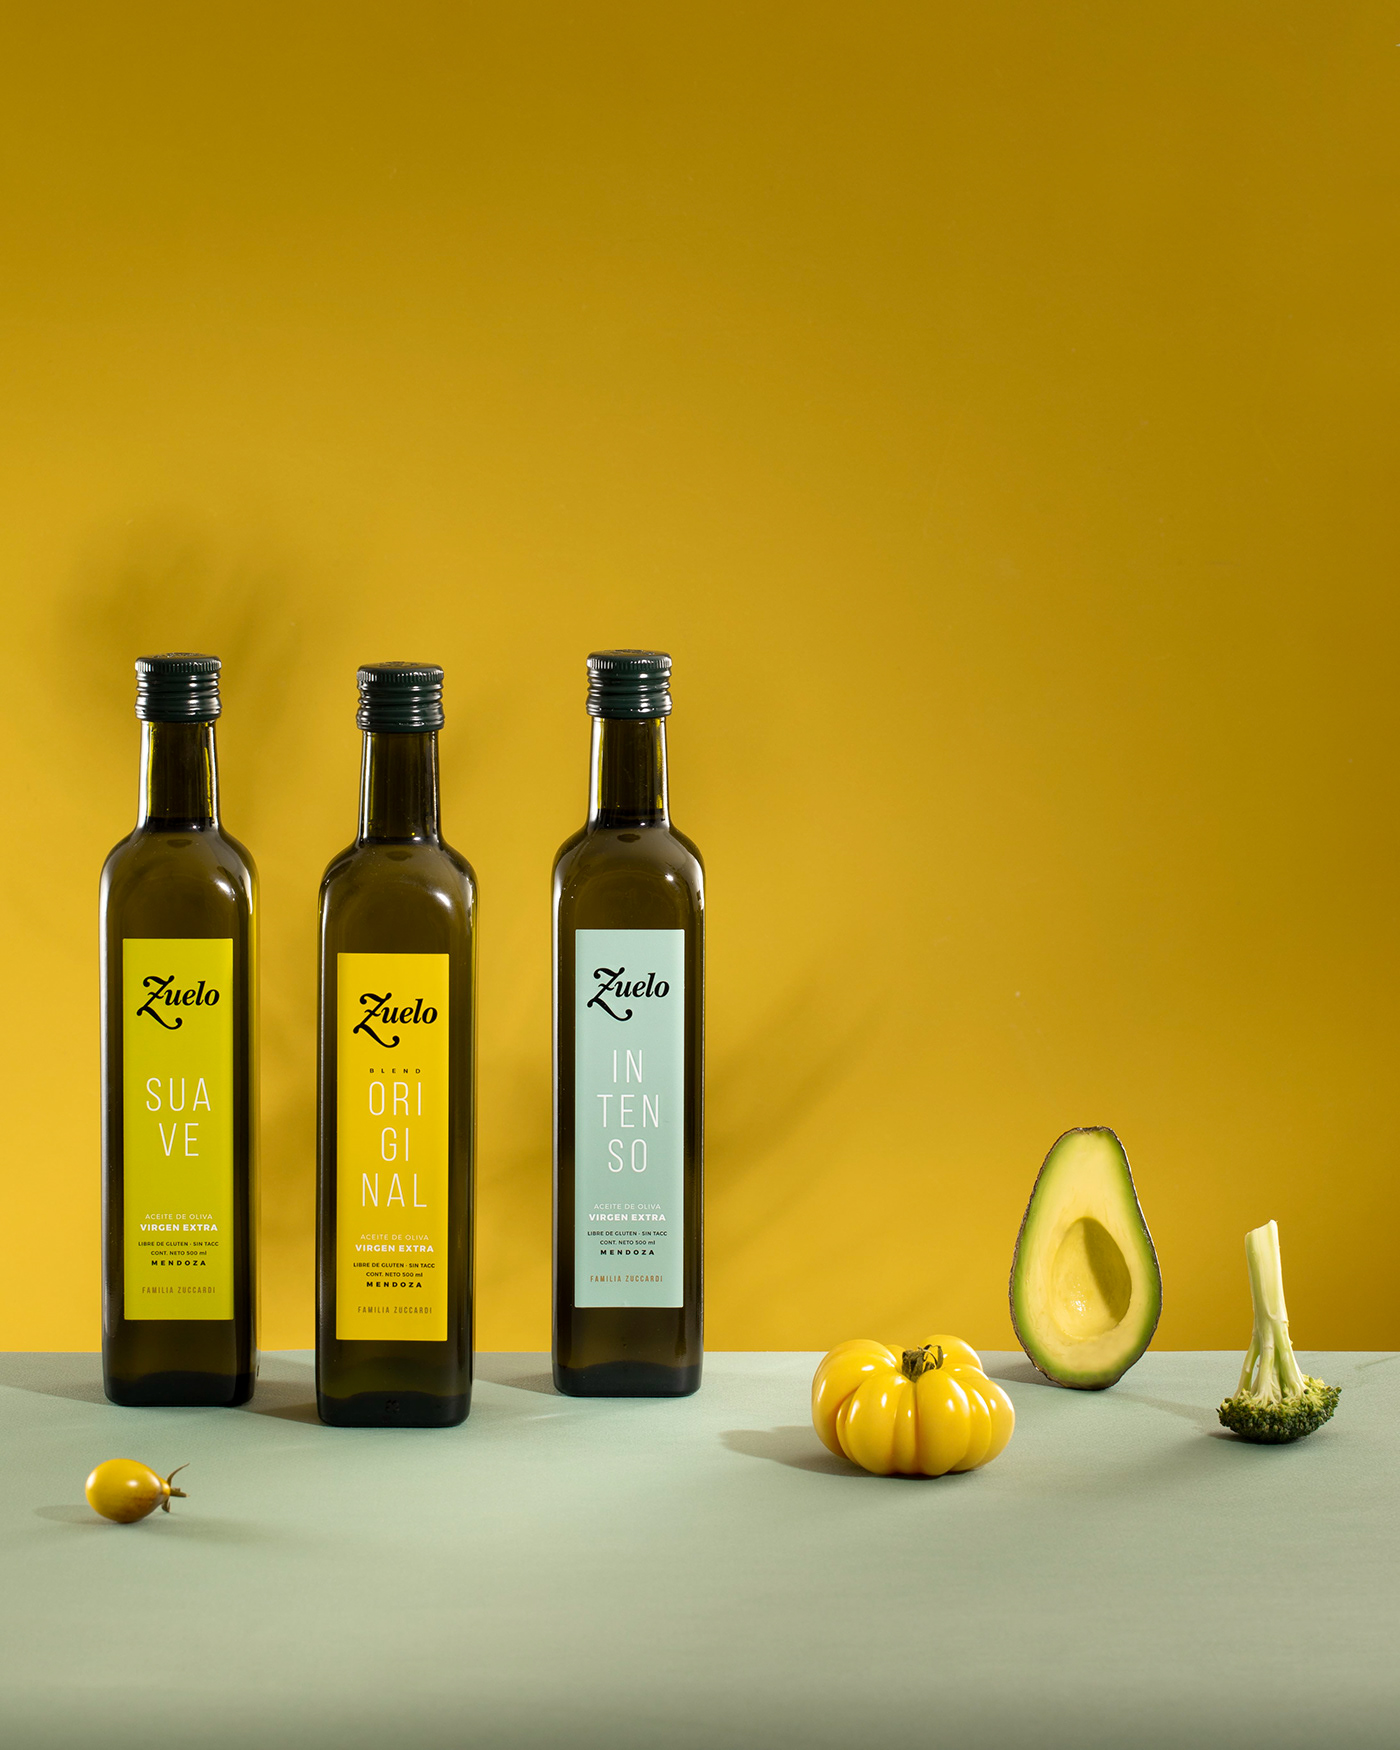 AOVE before&after Label oliveoil Packaging zuccardi aceite de oliva diseño gráfico identidad marca